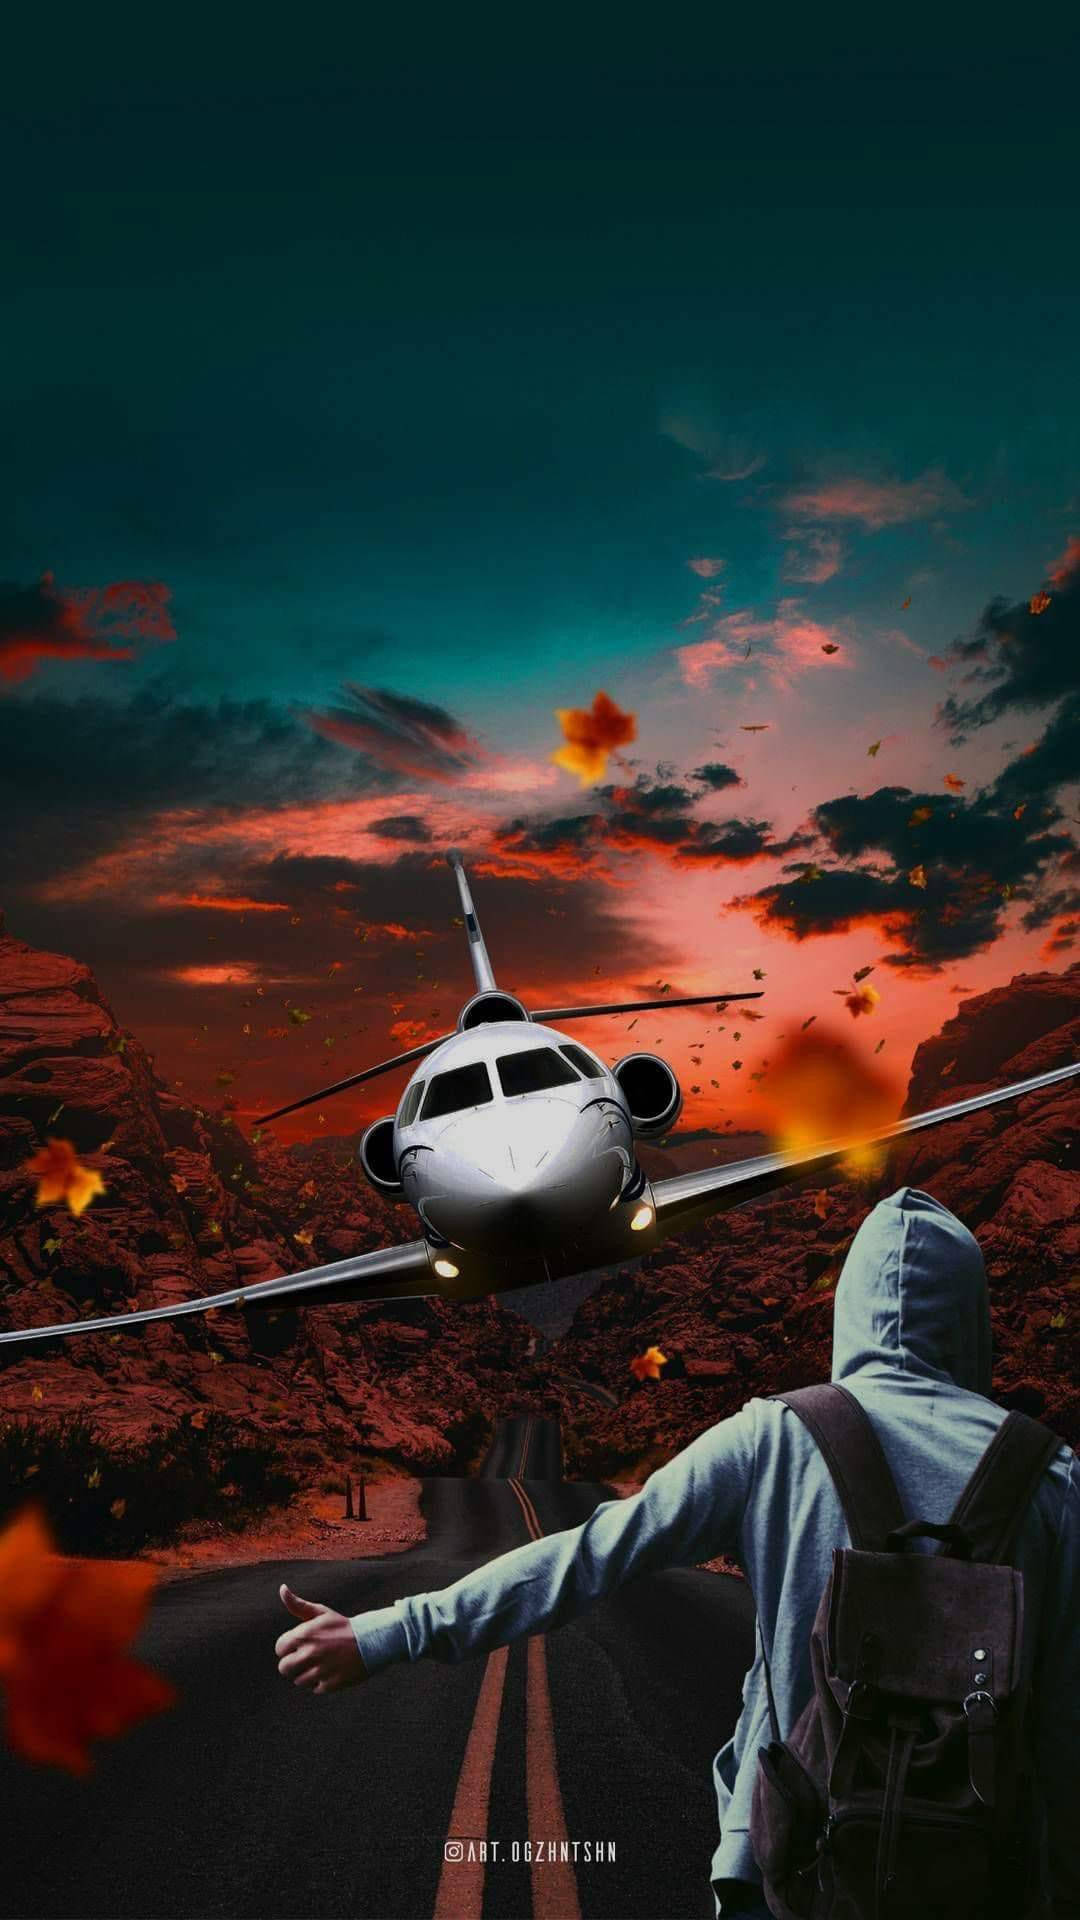 Man And Jet Iphone On The Runway Background